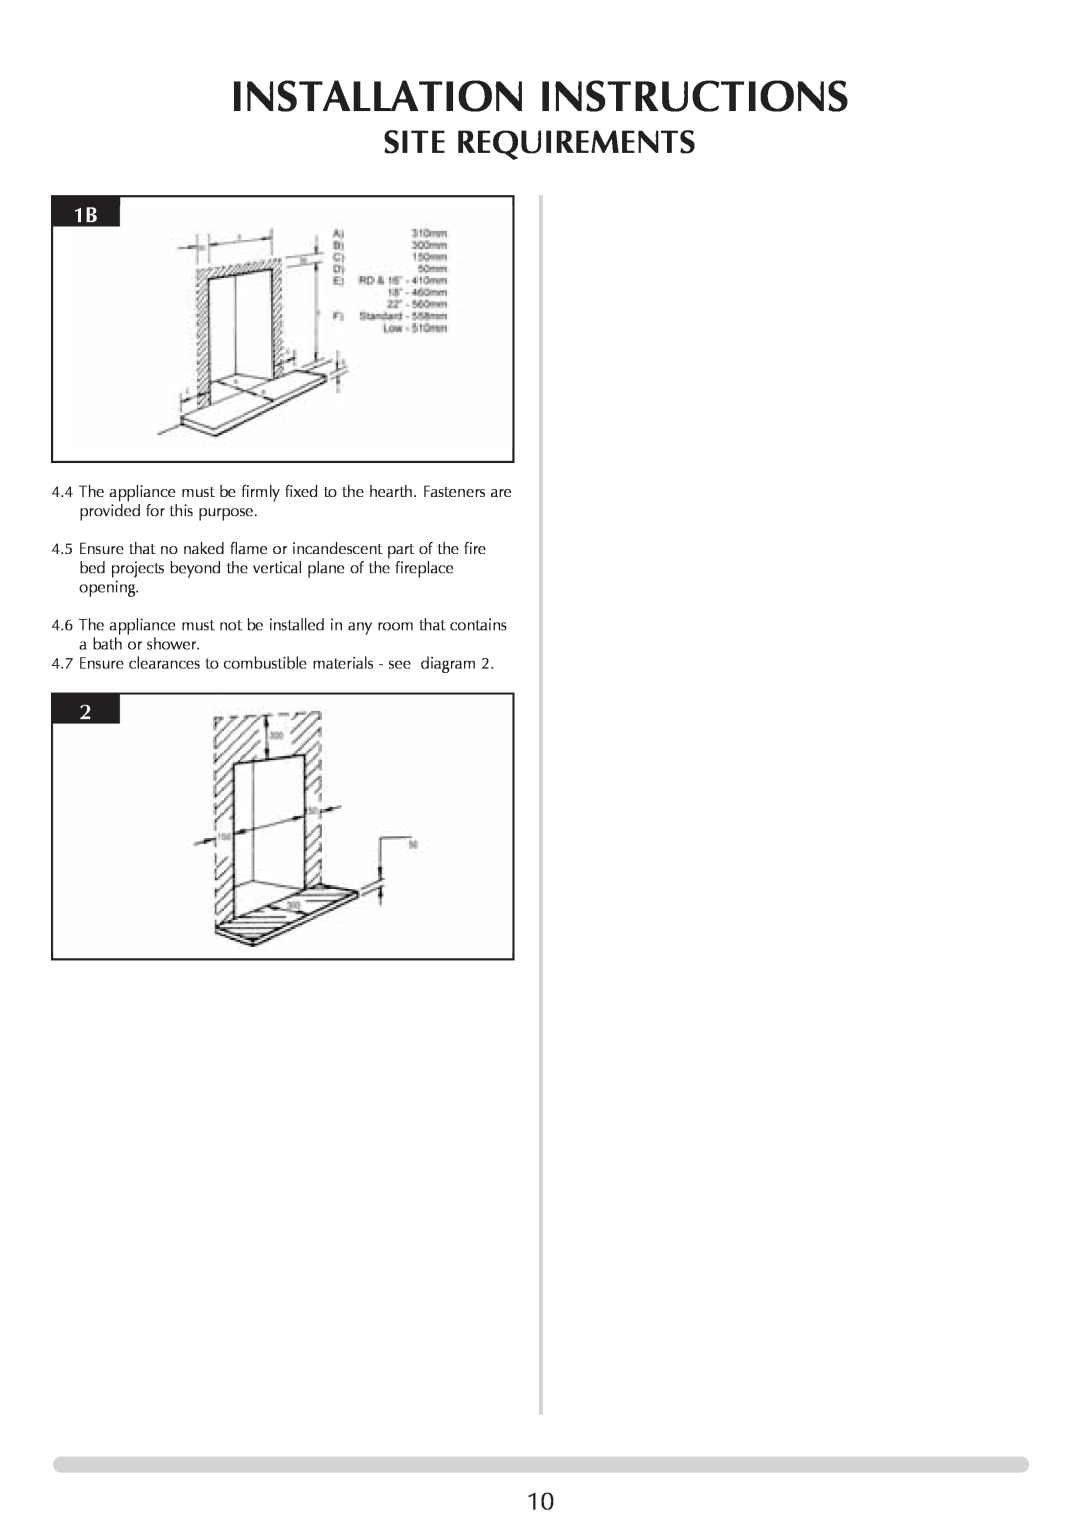 Stovax VFC Radiant & Convector Fire Range manual Installation Instructions, Site Requirements 